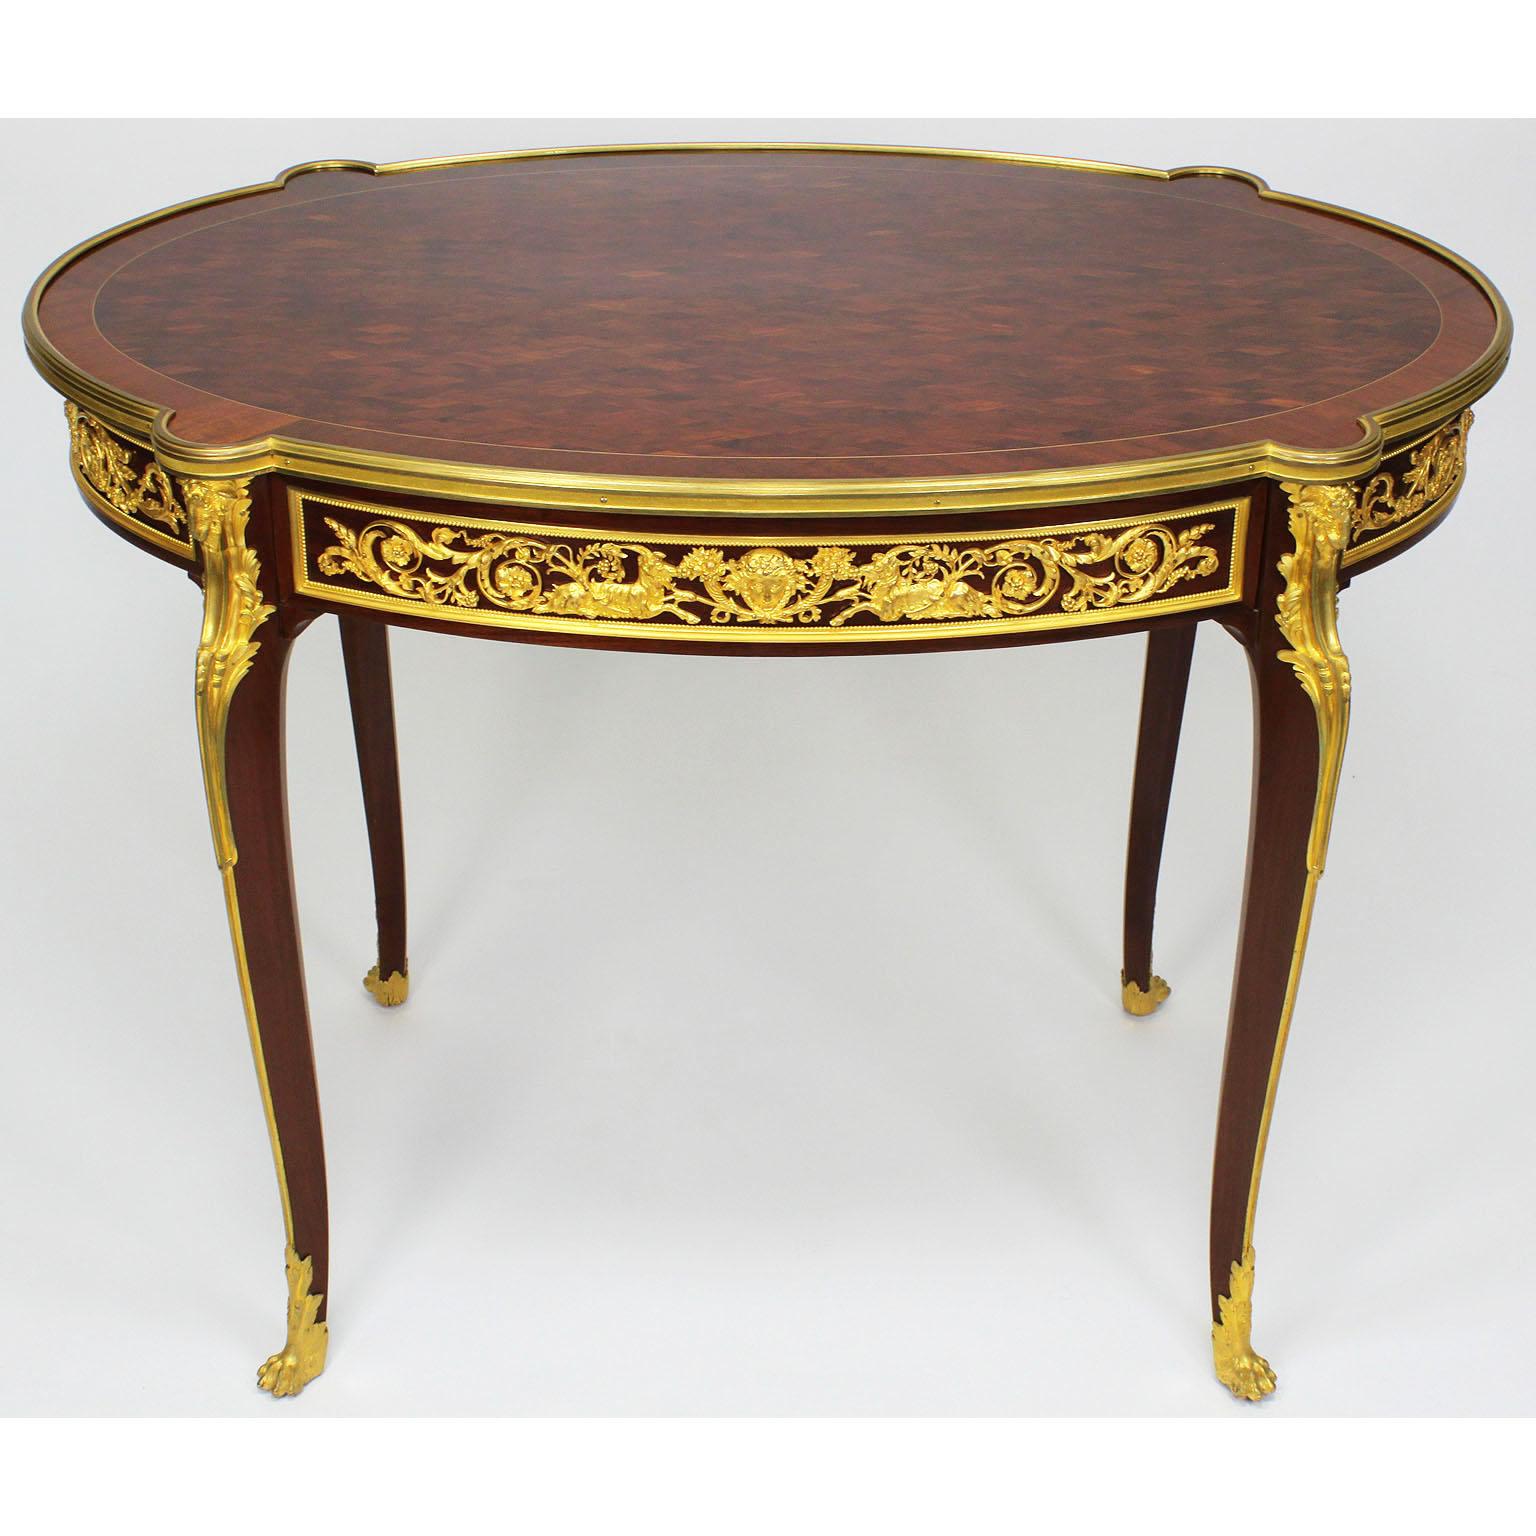 Carved 19th-20th Century Louis XV Gilt Bronze-Mounted Table, Francois Linke Attributed For Sale